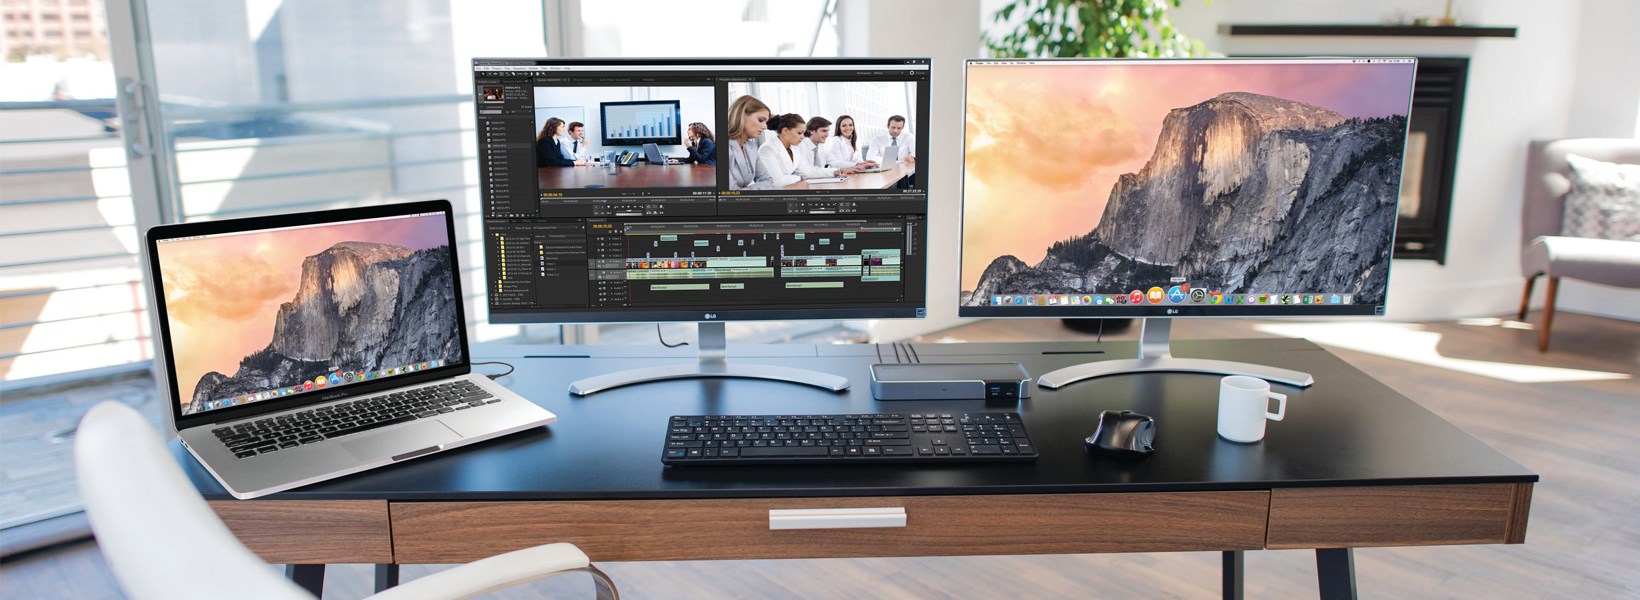 Dual monitors and a laptop connected to a Thunderbolt 3 Universal Docking Station